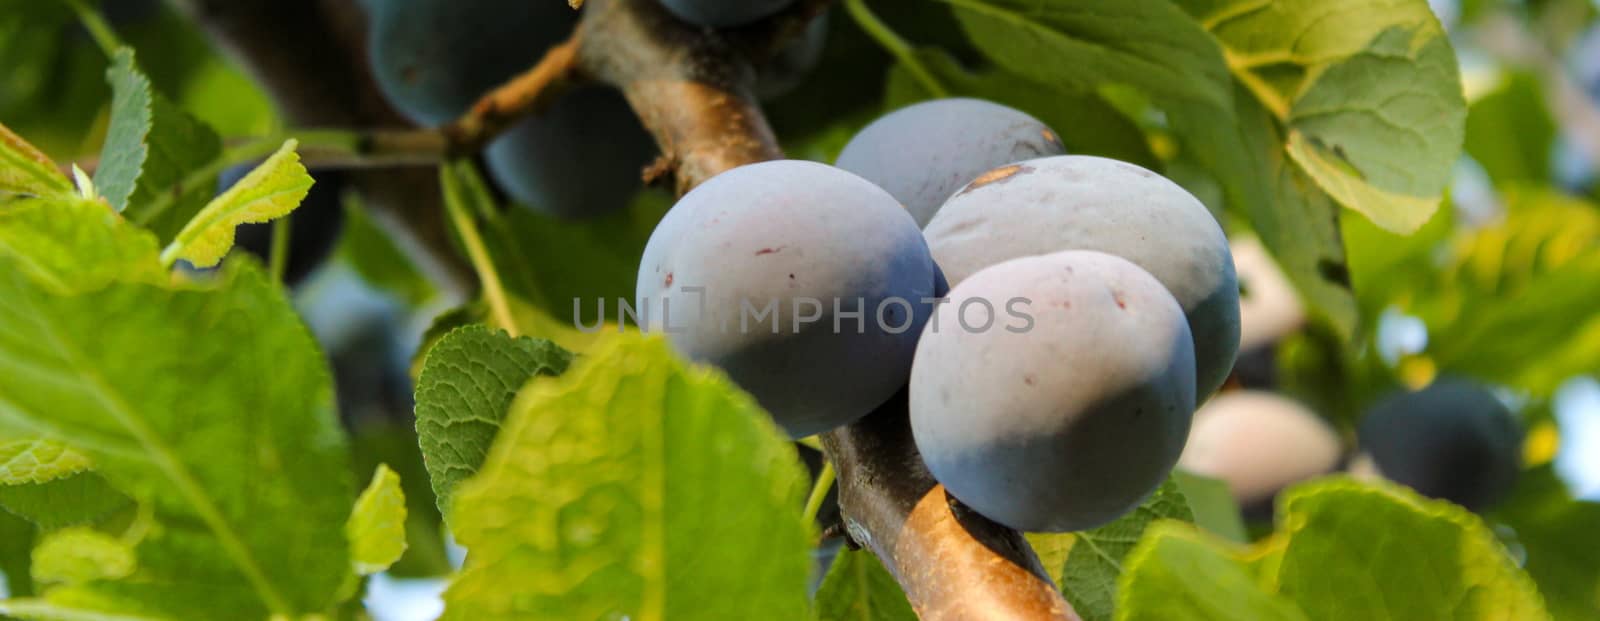 Banner. Ripe plums among the leaves on the branch. Zavidovici, Bosnia and Herzegovina.